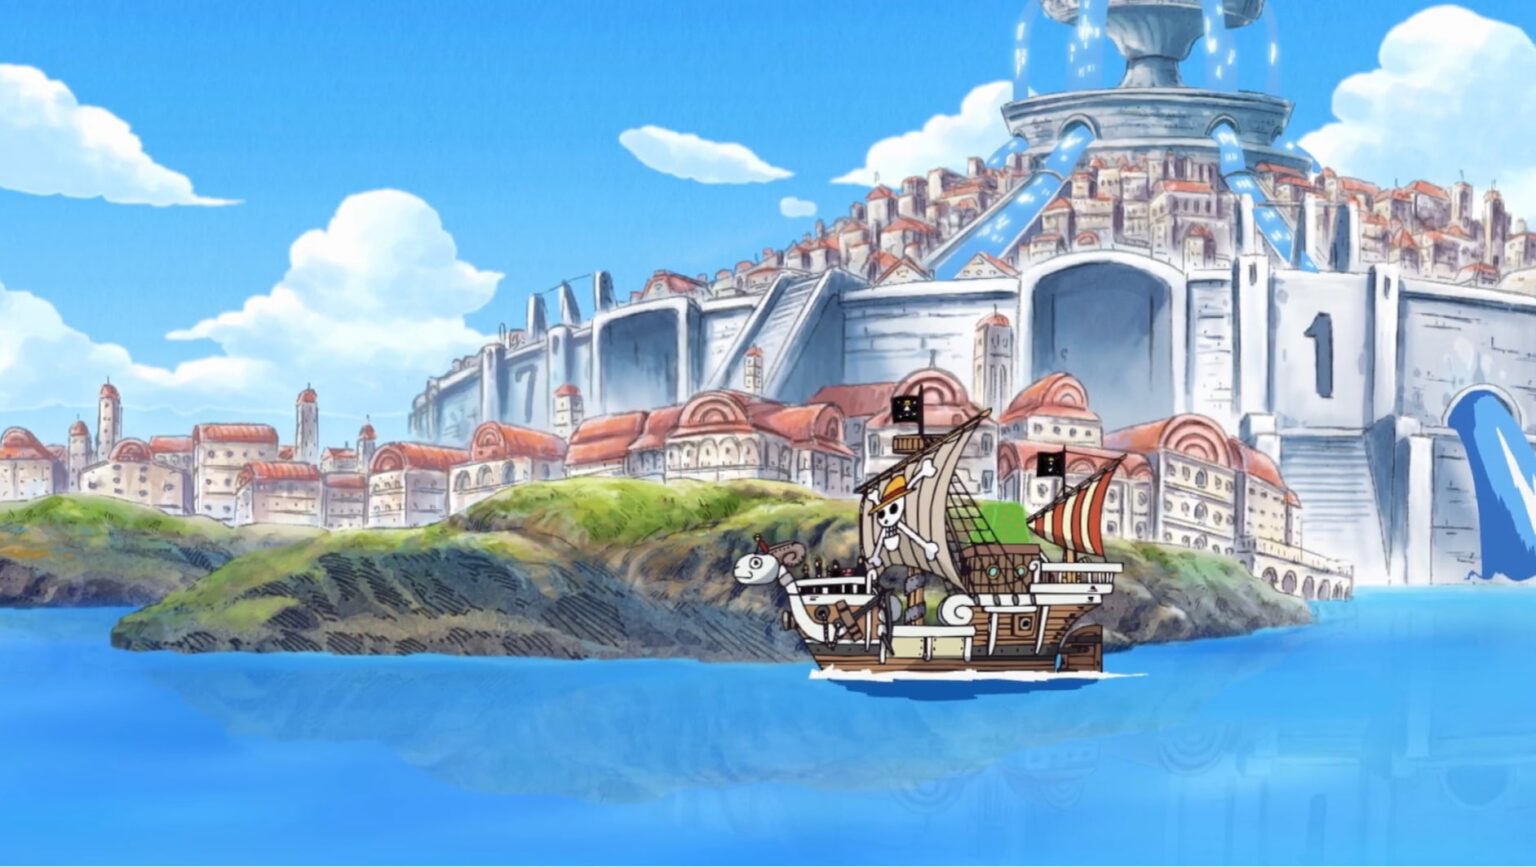 One Piece Straw Hats arrives at Water 7